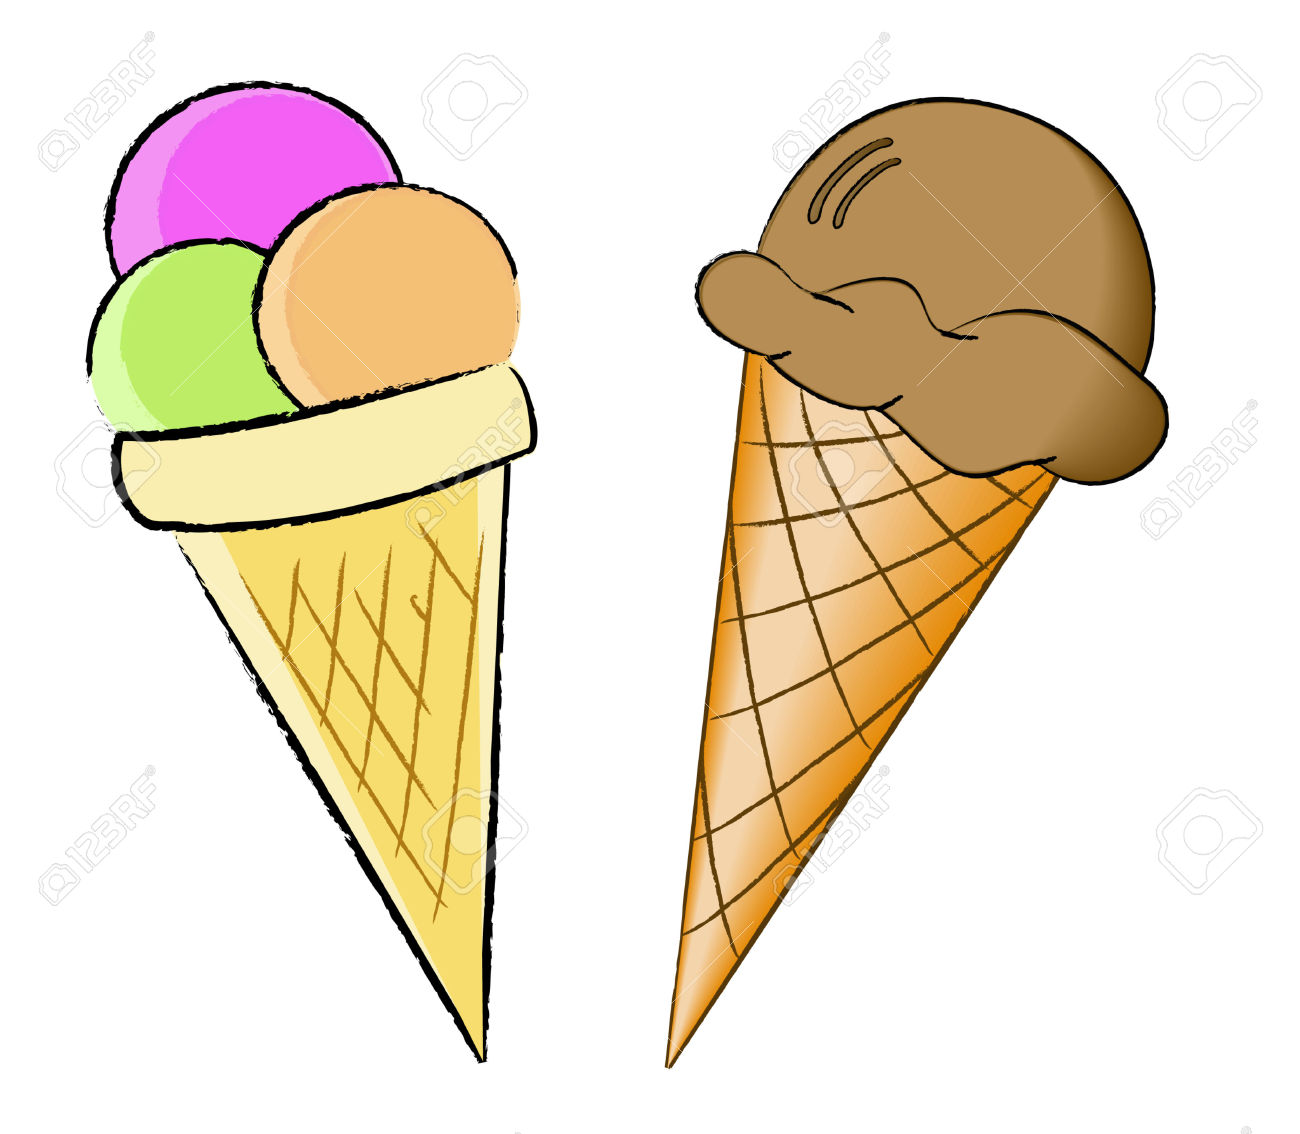 Eis clipart #4, Download drawings